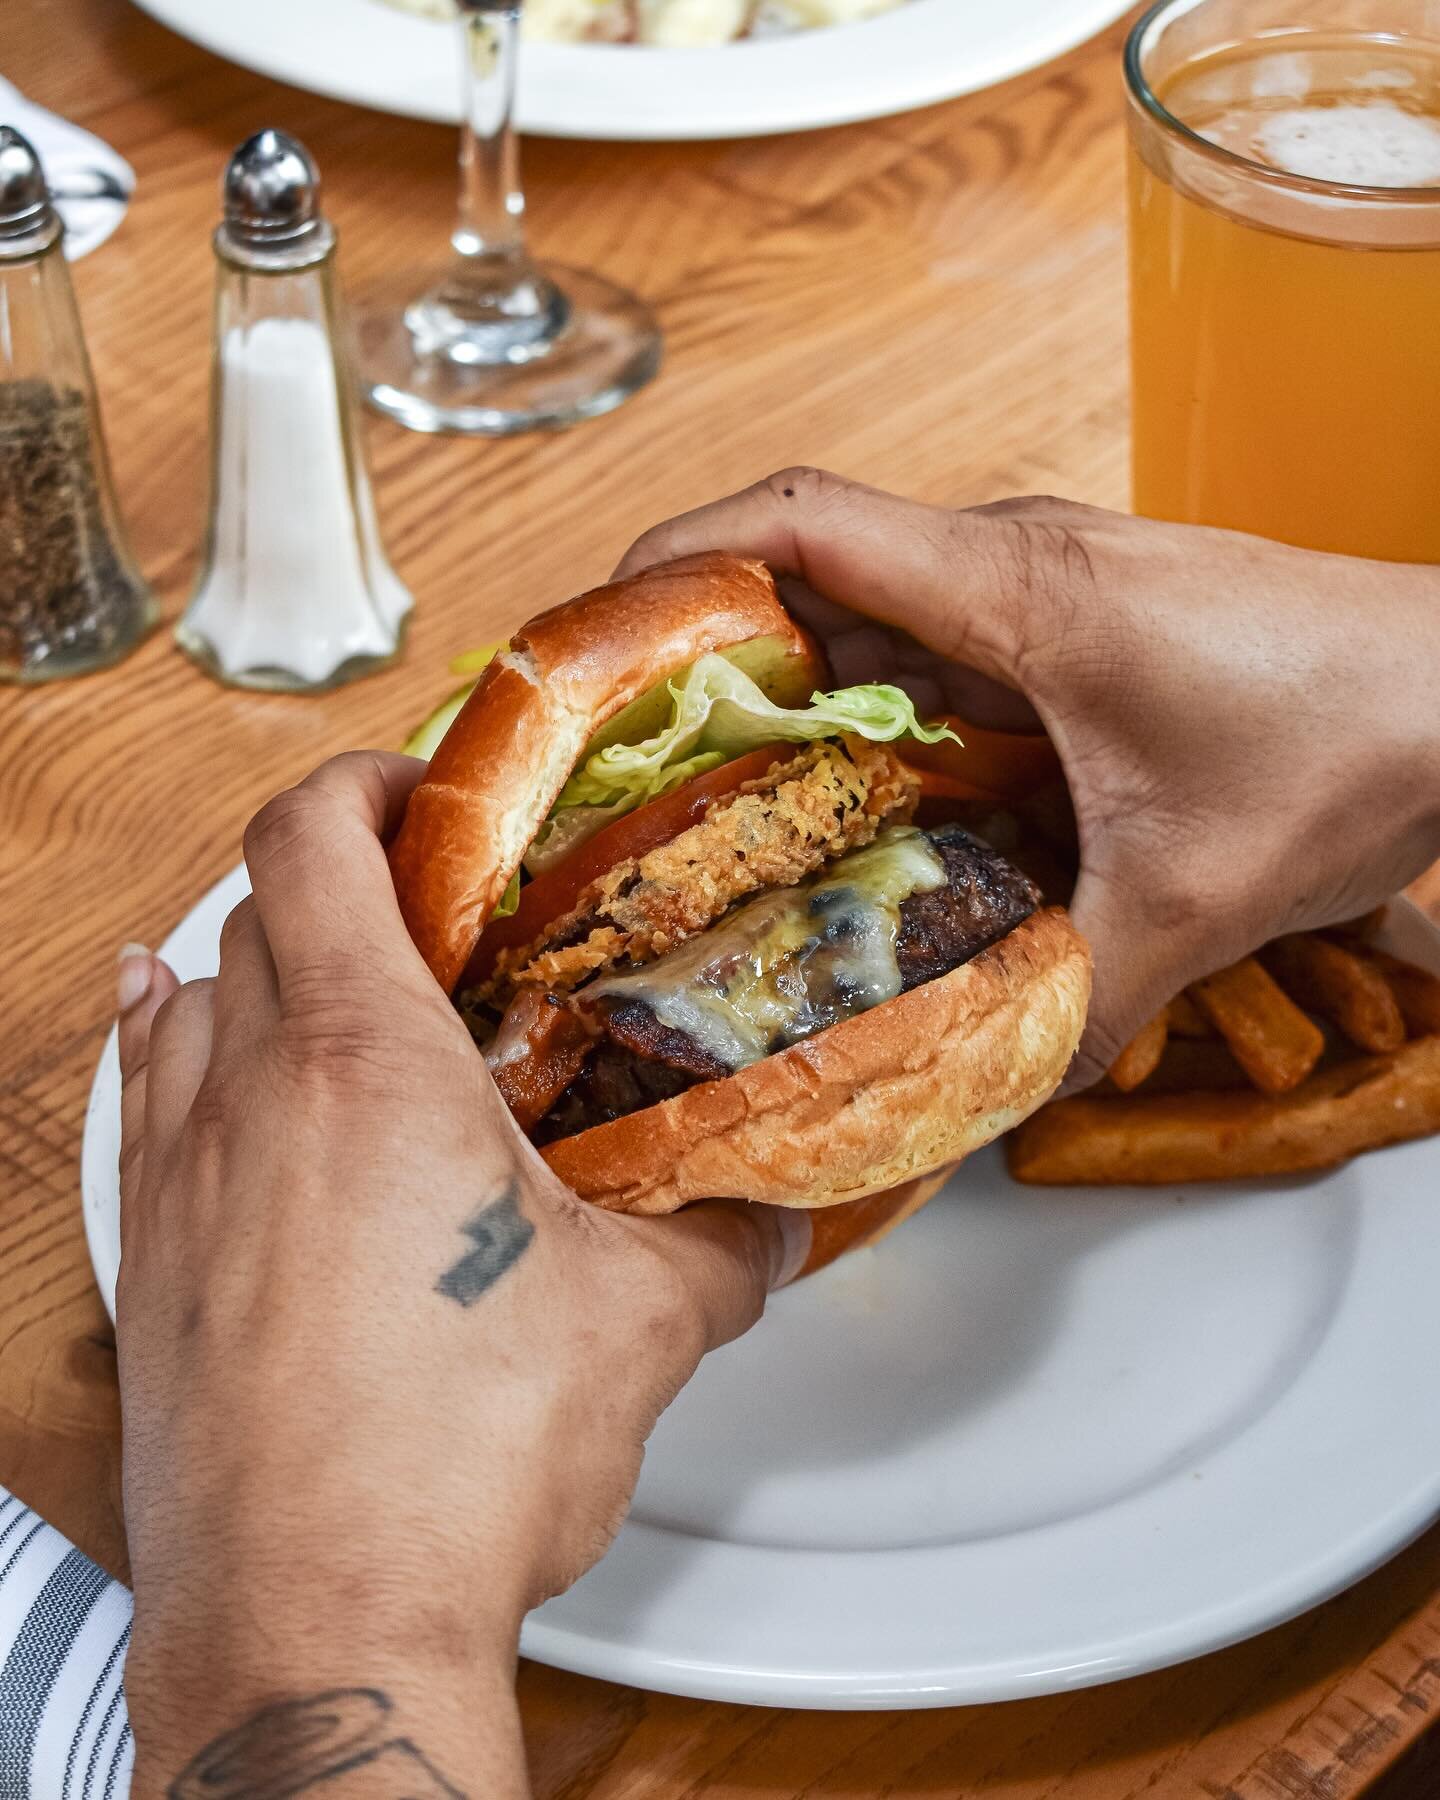 April&rsquo;s new menu items are looking ridiculously good 🔥&nbsp;Book your table today to be one of the first to try our&nbsp;New Eastie Burger or Truffle Orecchiette Mac and Cheese!

#burger&nbsp;#newmenu #bostontavern&nbsp;#nachos #seafood #resta